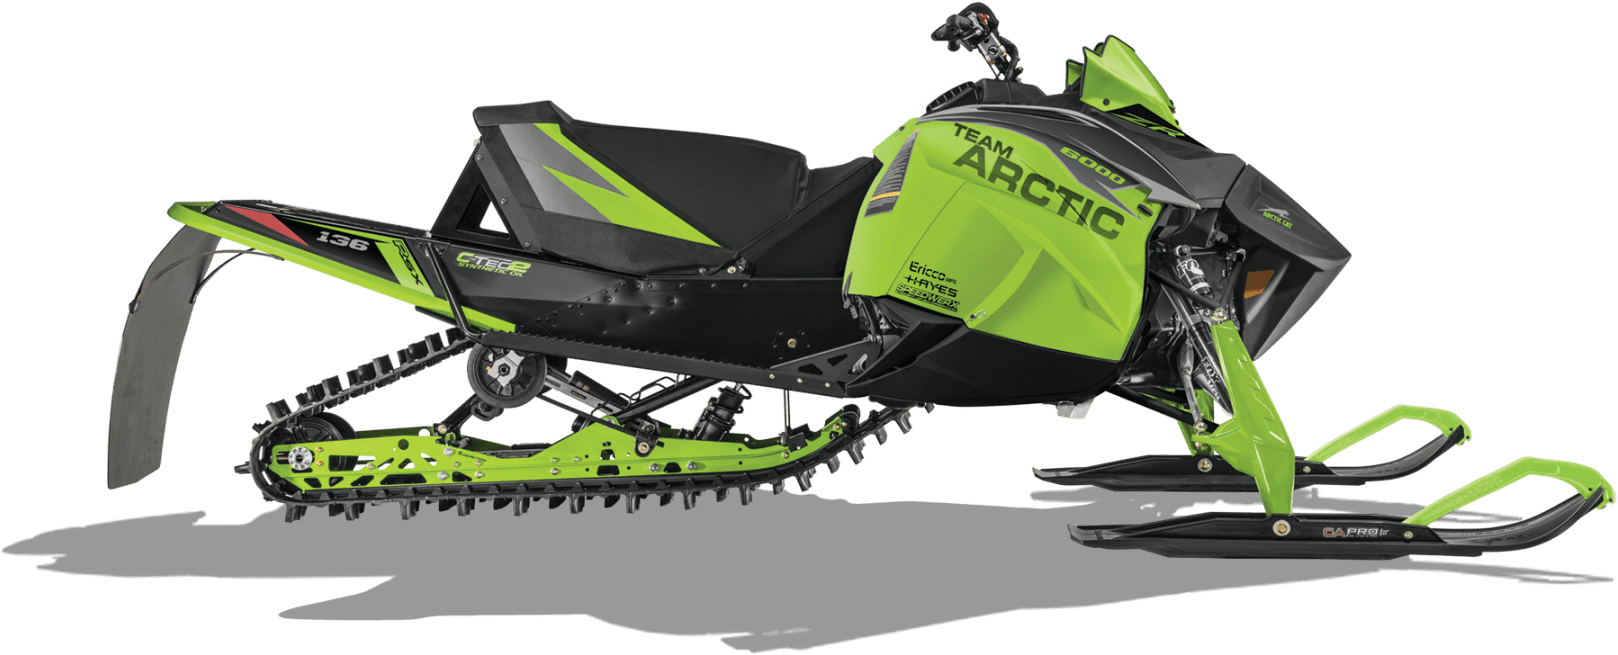 Download The Snowmobile Has Its Own Characteristics Including 2020 Arctic Cat Snowmobiles Png Image With No Background Pngkey Com